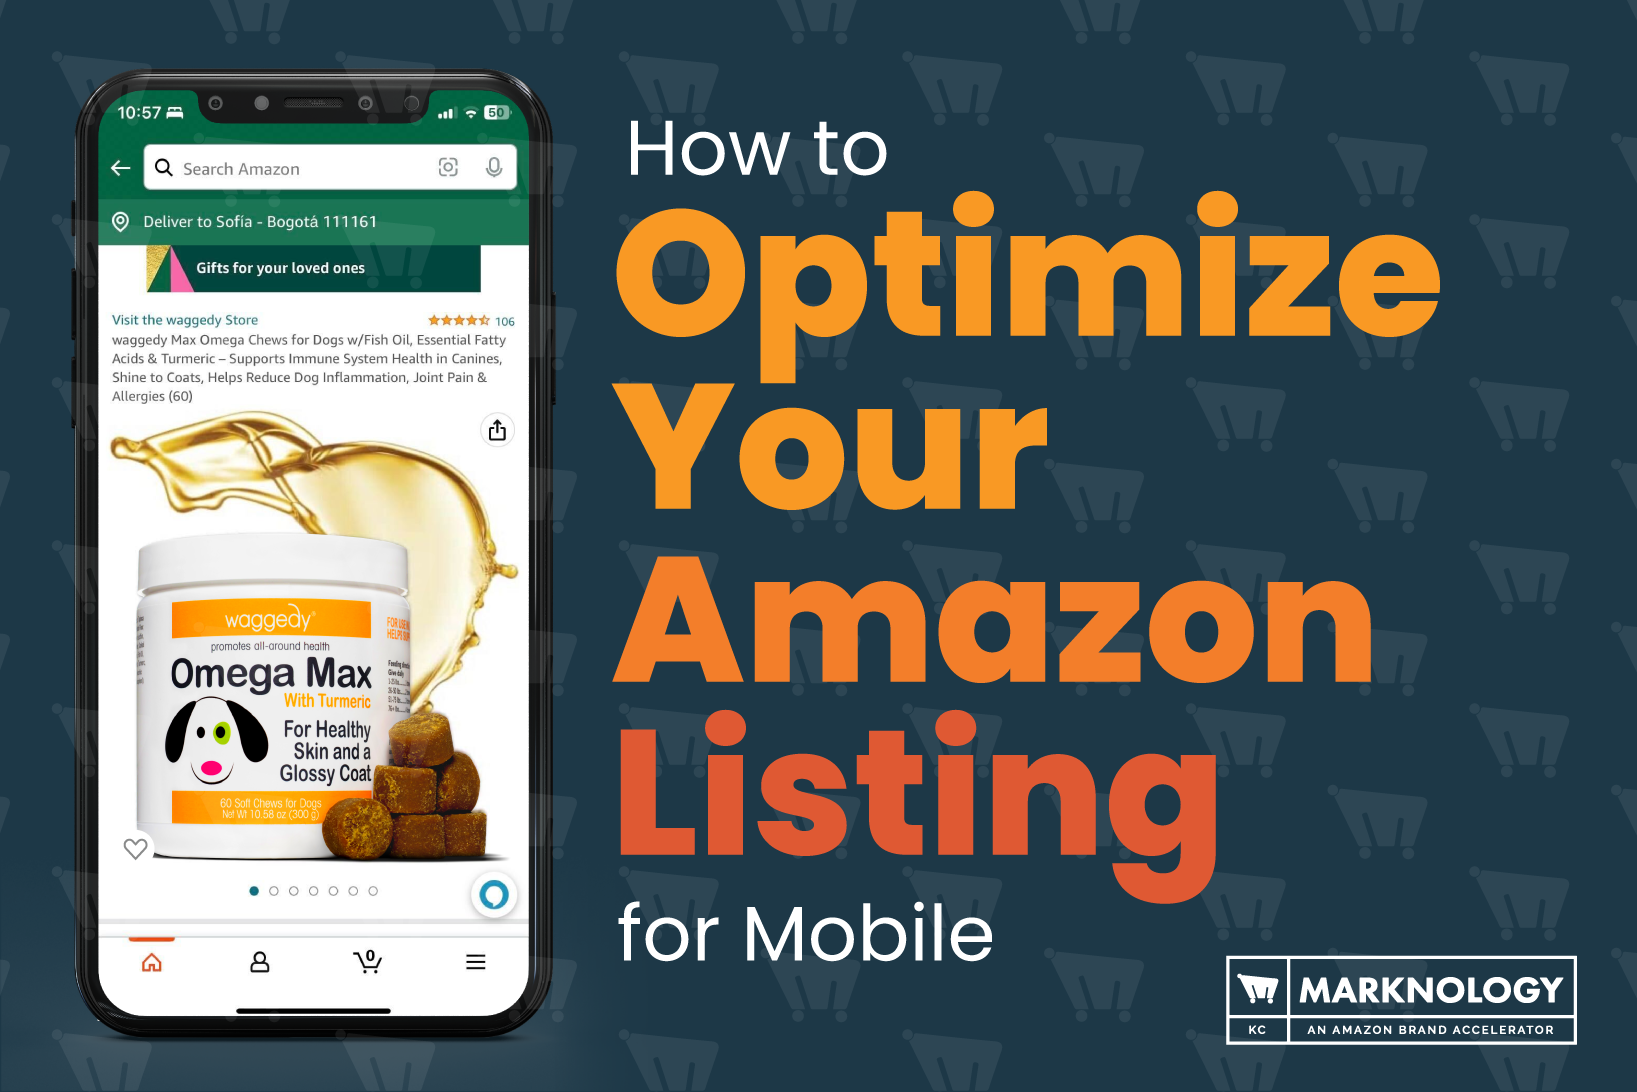 How to Optimize Your Amazon Listing for Mobile